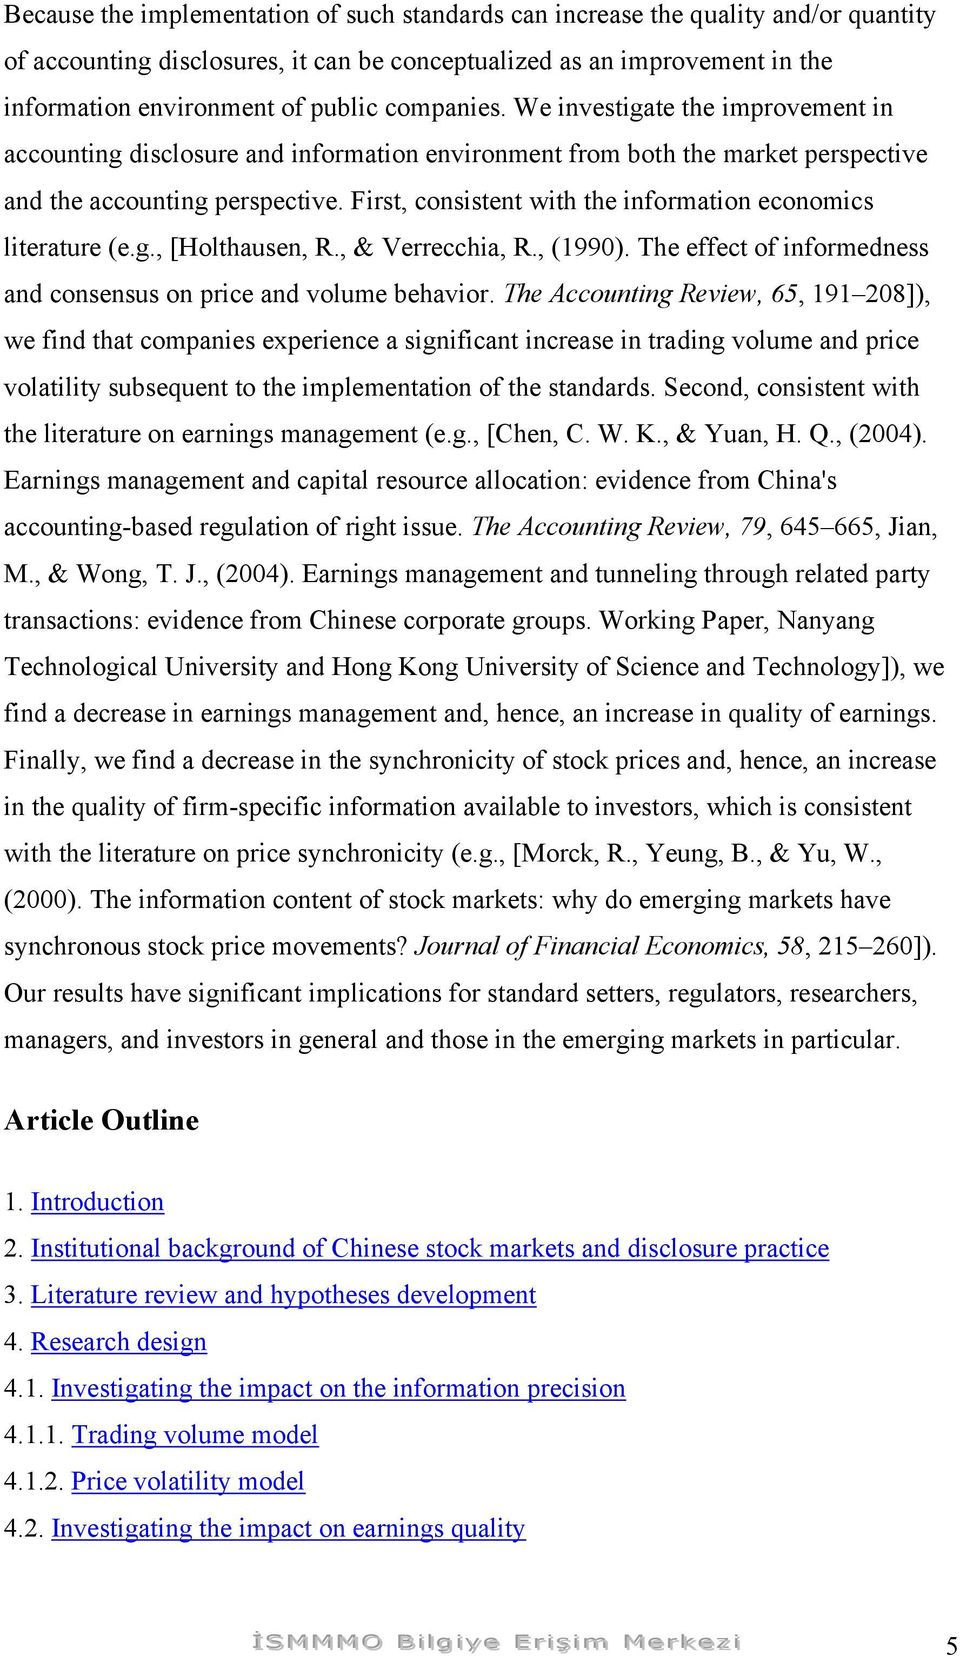 First, consistent with the information economics literature (e.g., [Holthausen, R., & Verrecchia, R., (1990). The effect of informedness and consensus on price and volume behavior.